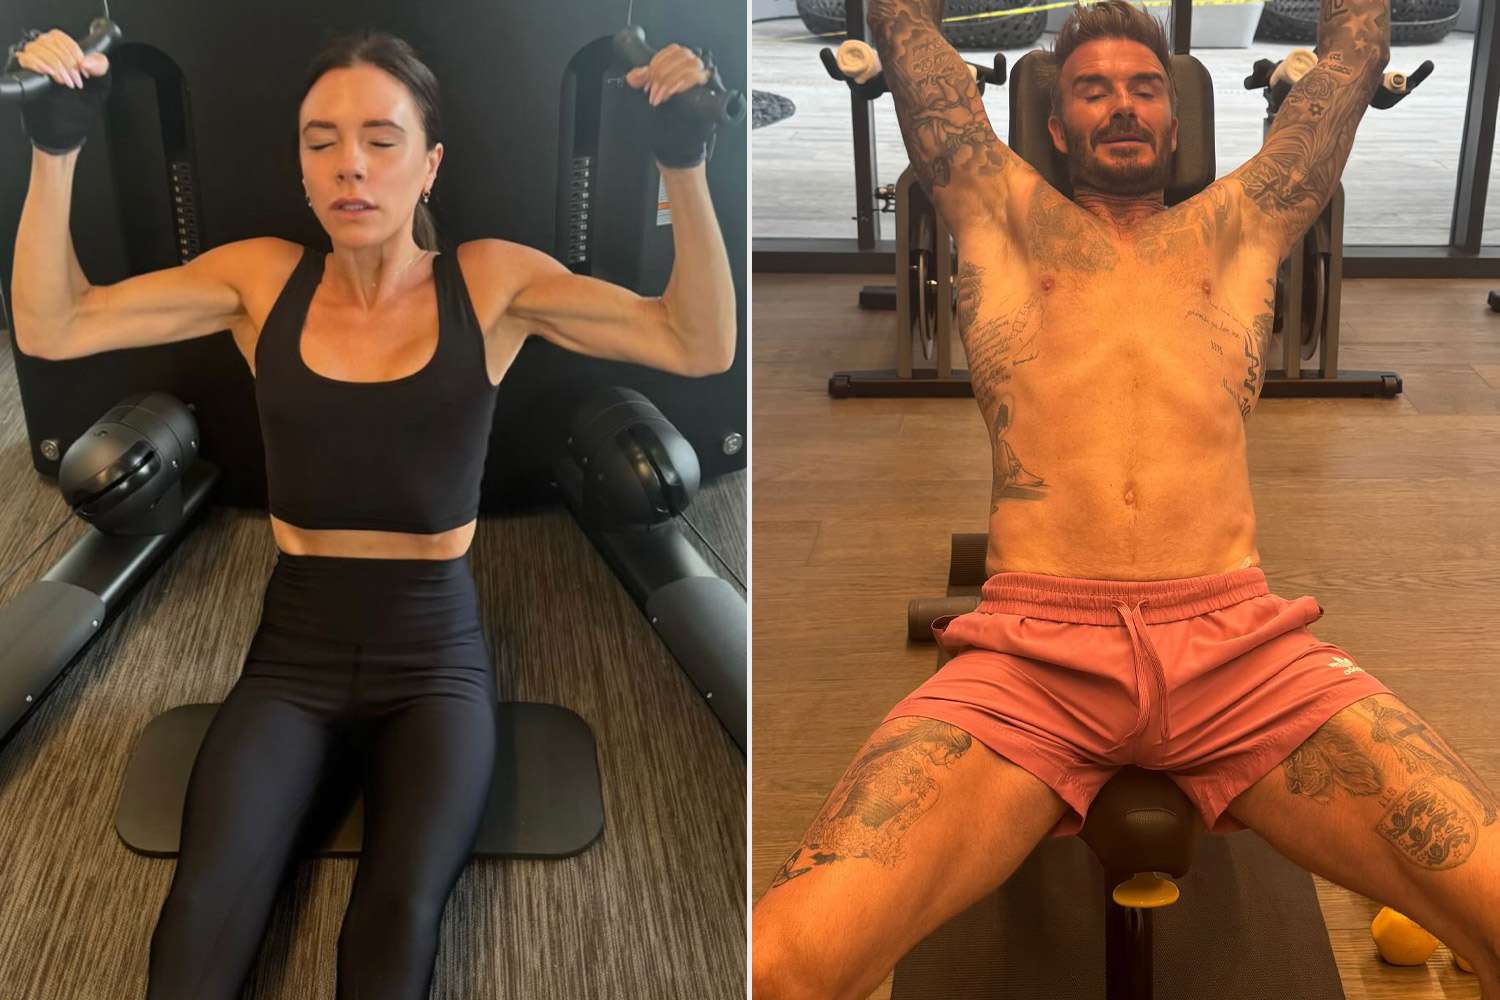 Victoria Beckham Post Shirtless Thirst Trap of Husband David - and Shares Her Own Flex